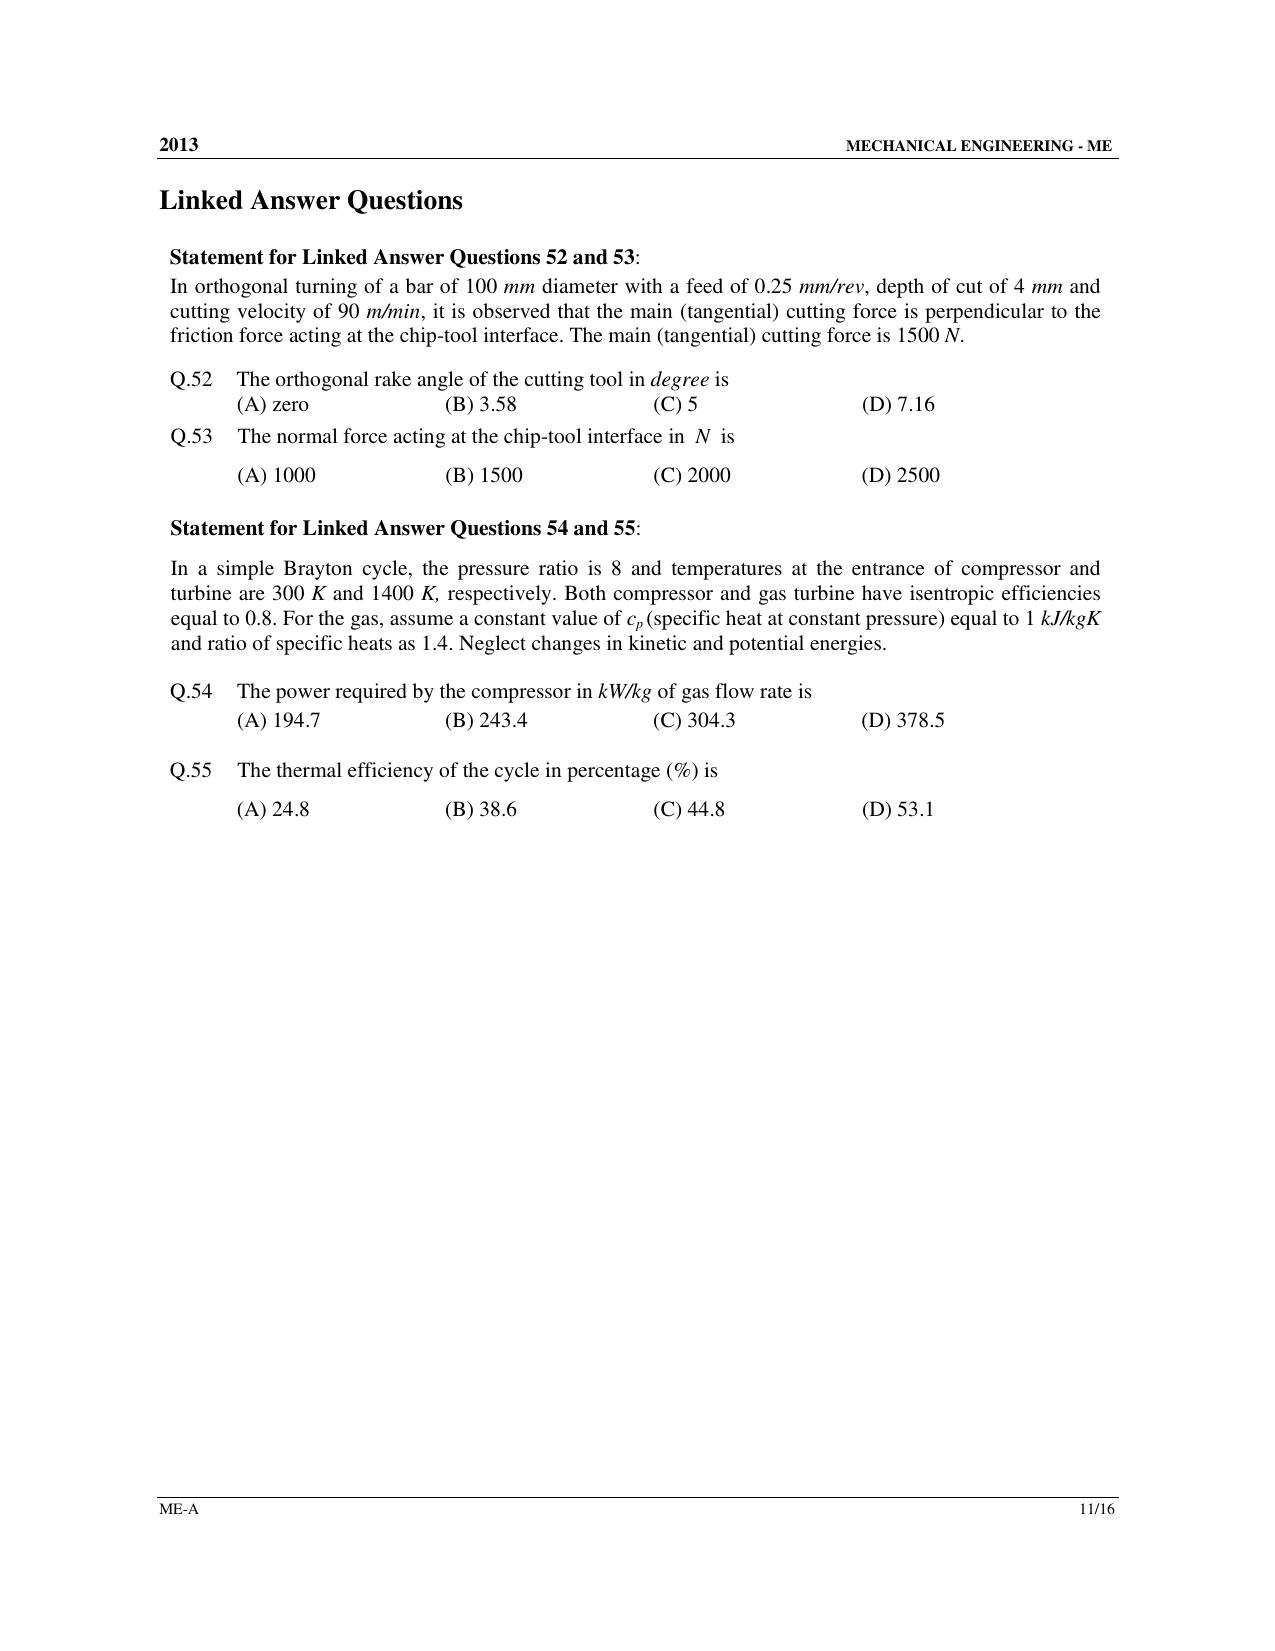 GATE 2013 Mechanical Engineering (ME) Question Paper with Answer Key - Page 12